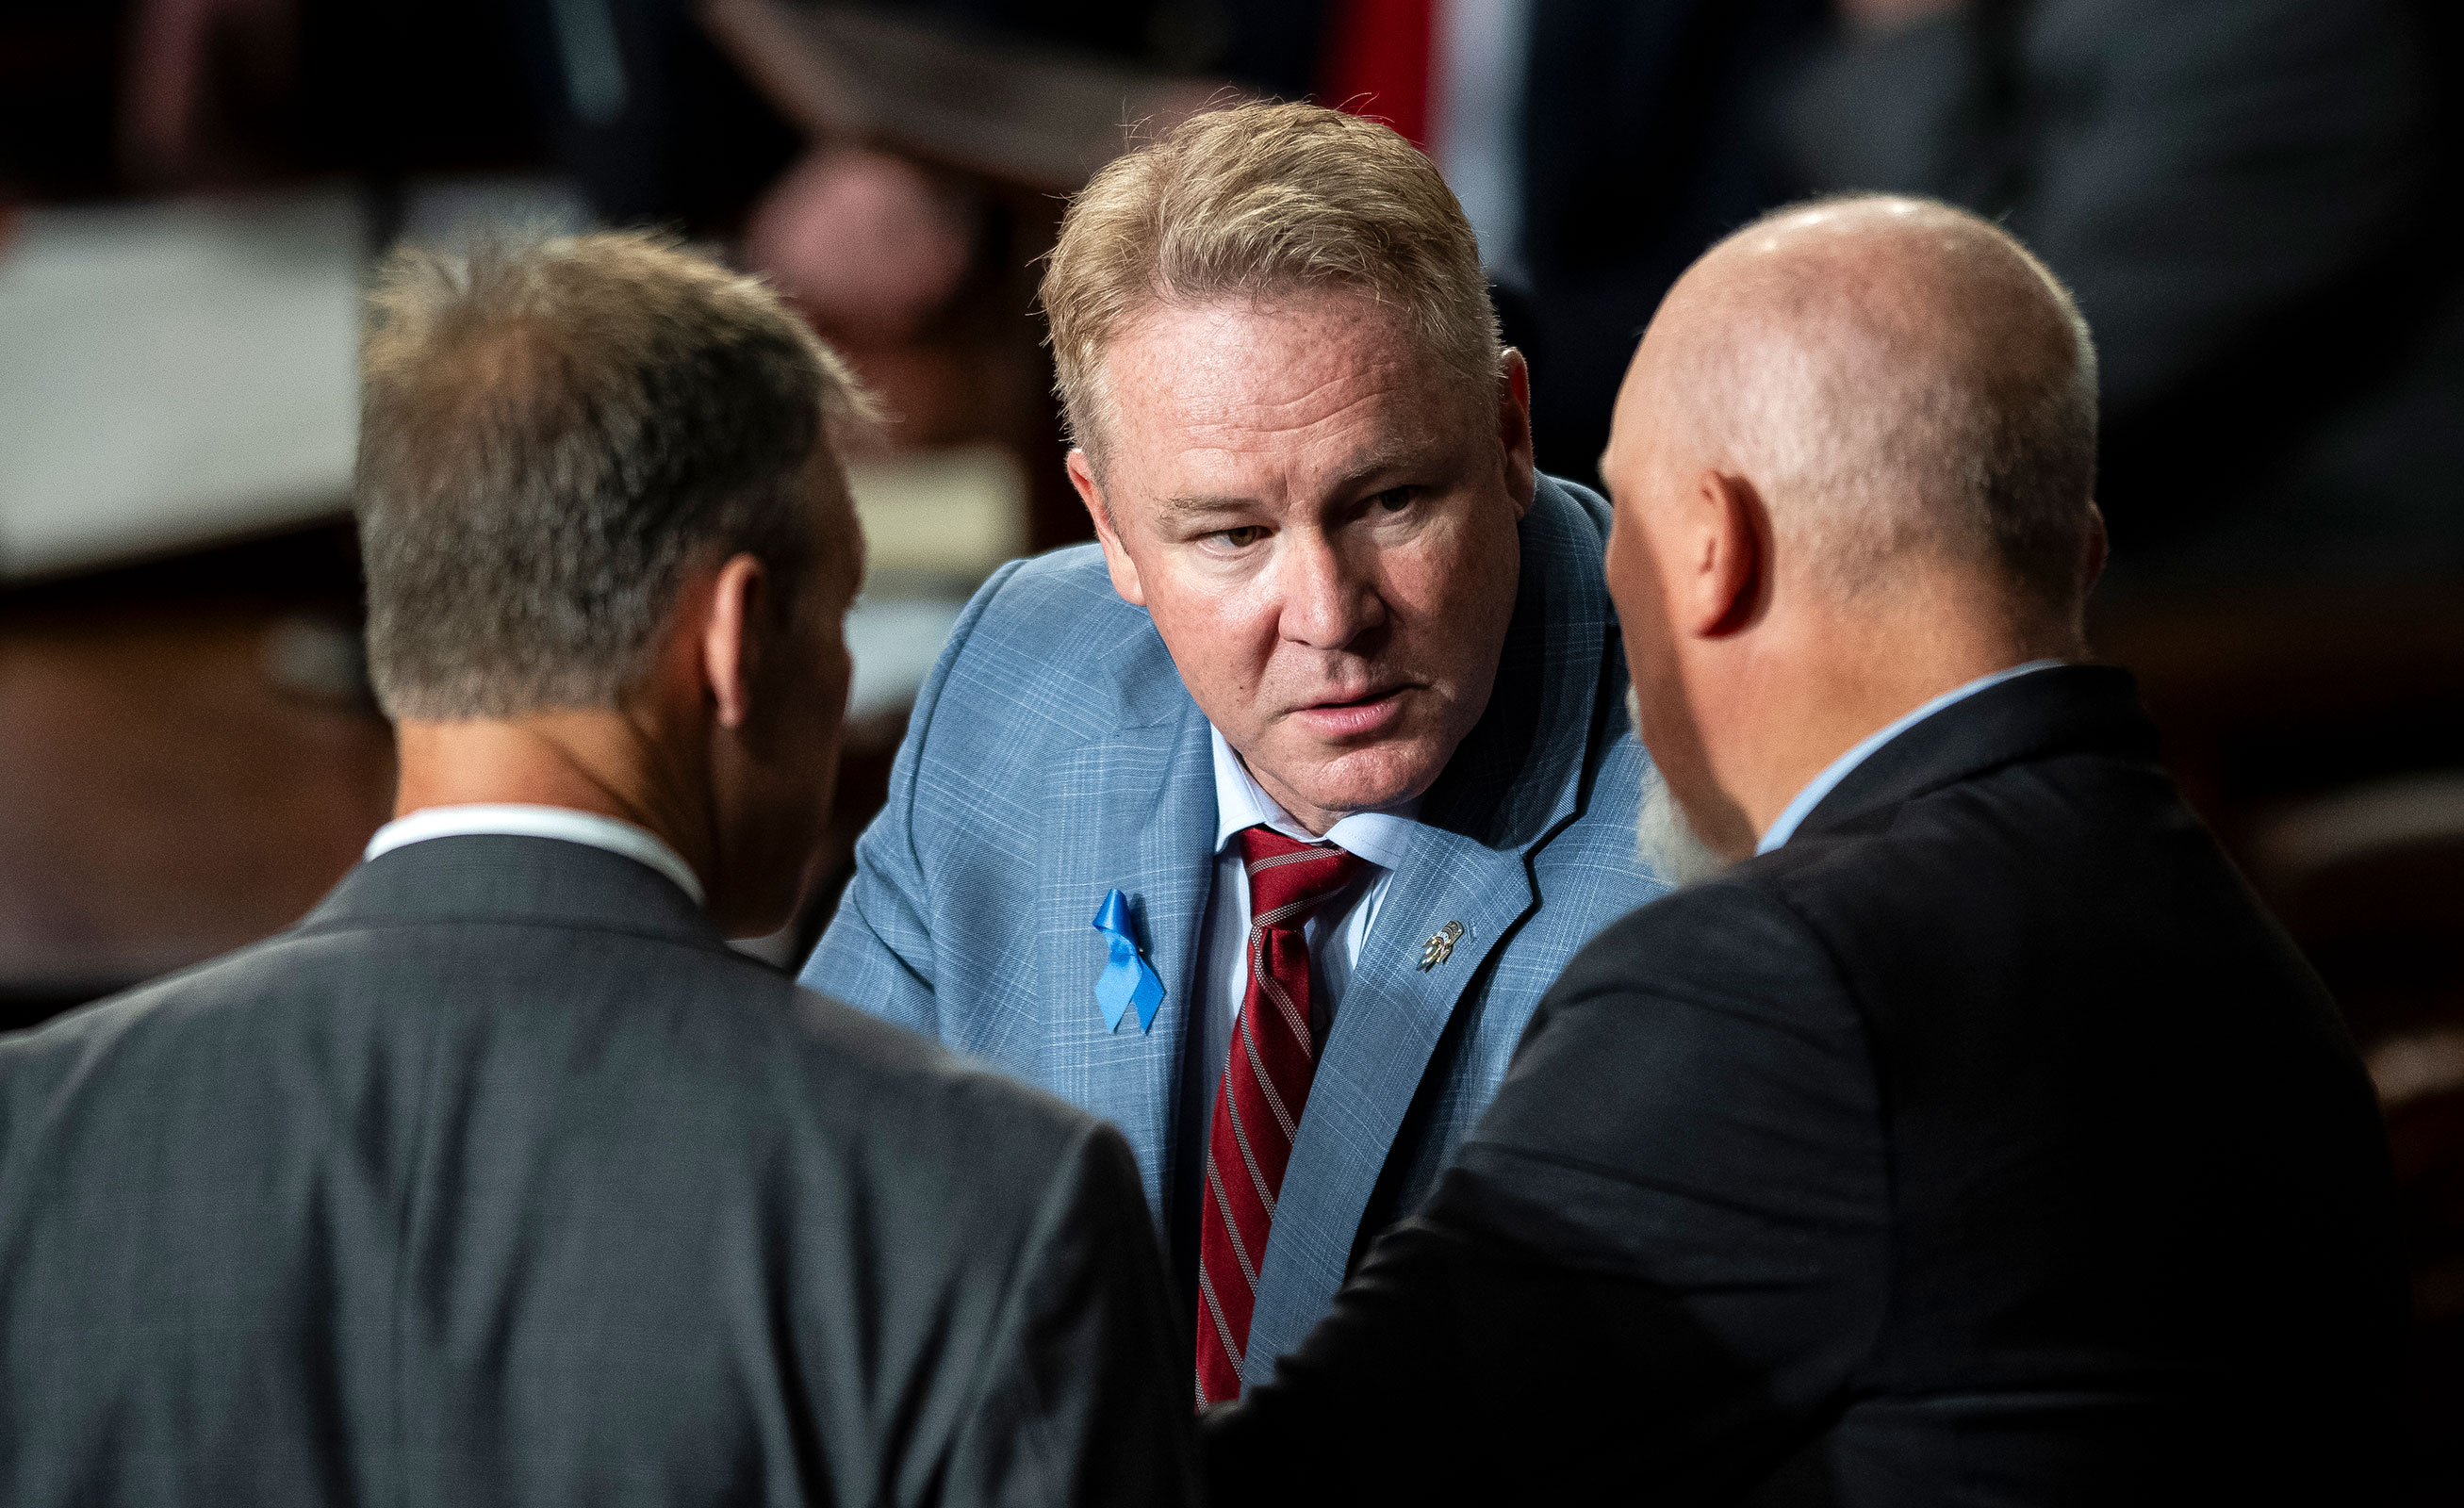 Rep. Warren Davidson, center, speaks with Representative Scott Perry, left, and Representative Chip Roy, right, before a second round of voting for Speaker of the House begins, in the House Chamber, at the Capitol, in Washington, DC, on Wednesday, October 18. 